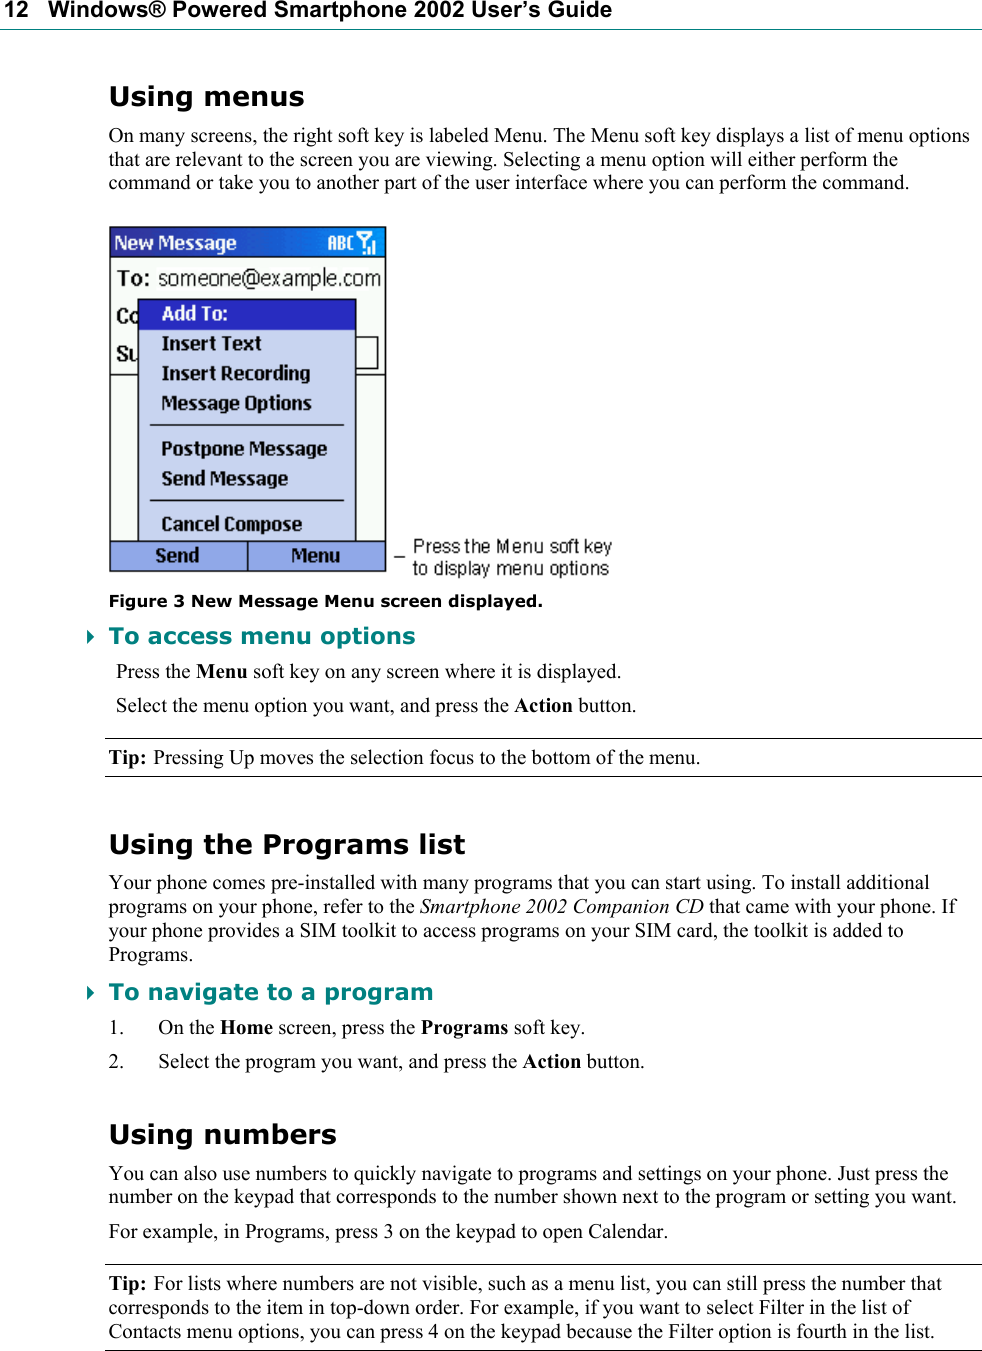 12   Windows® Powered Smartphone 2002 User’s Guide Using menus On many screens, the right soft key is labeled Menu. The Menu soft key displays a list of menu options that are relevant to the screen you are viewing. Selecting a menu option will either perform the command or take you to another part of the user interface where you can perform the command.  Figure 3 New Message Menu screen displayed.  To access menu options Press the Menu soft key on any screen where it is displayed. Select the menu option you want, and press the Action button. Tip: Pressing Up moves the selection focus to the bottom of the menu. Using the Programs list Your phone comes pre-installed with many programs that you can start using. To install additional programs on your phone, refer to the Smartphone 2002 Companion CD that came with your phone. If your phone provides a SIM toolkit to access programs on your SIM card, the toolkit is added to Programs.  To navigate to a program 1. On the Home screen, press the Programs soft key. 2. Select the program you want, and press the Action button. Using numbers You can also use numbers to quickly navigate to programs and settings on your phone. Just press the number on the keypad that corresponds to the number shown next to the program or setting you want. For example, in Programs, press 3 on the keypad to open Calendar. Tip: For lists where numbers are not visible, such as a menu list, you can still press the number that corresponds to the item in top-down order. For example, if you want to select Filter in the list of Contacts menu options, you can press 4 on the keypad because the Filter option is fourth in the list. 